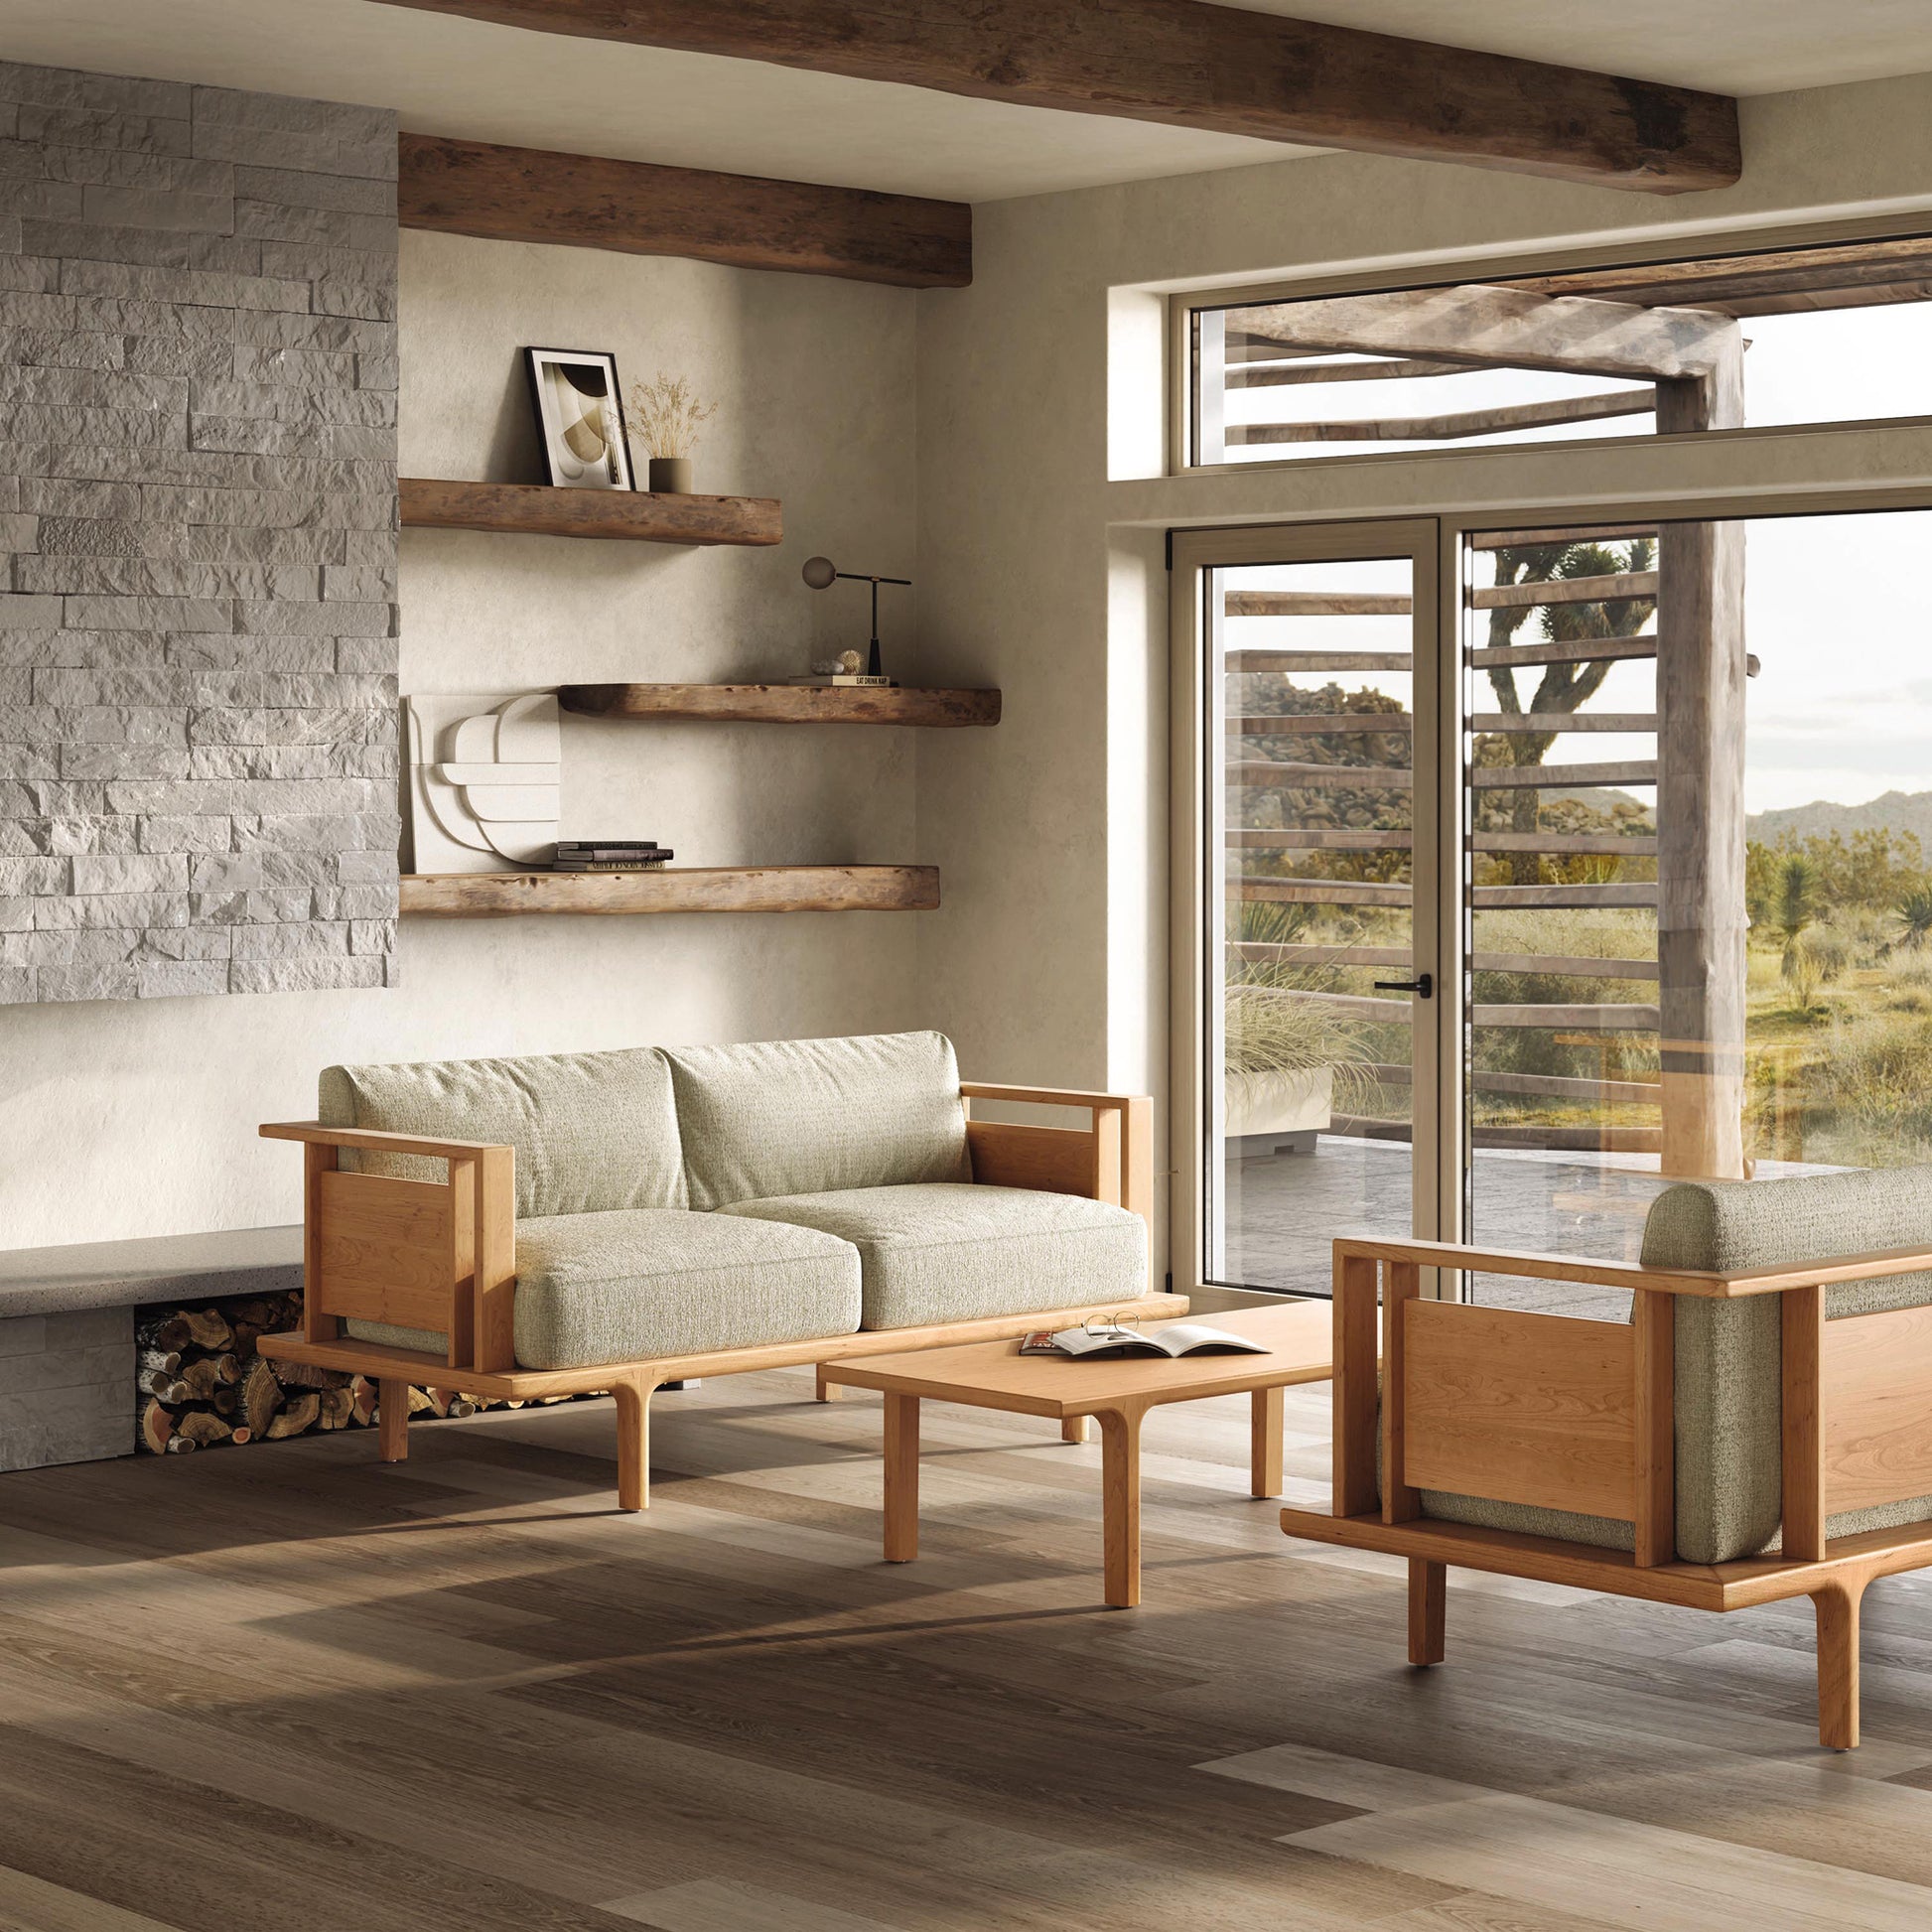 A modern living room featuring wooden furniture, floating shelves, and a stone accent wall with a view of the outdoors through large glass doors is complemented by a Copeland Furniture Sierra Cherry Upholstered Loveseat.